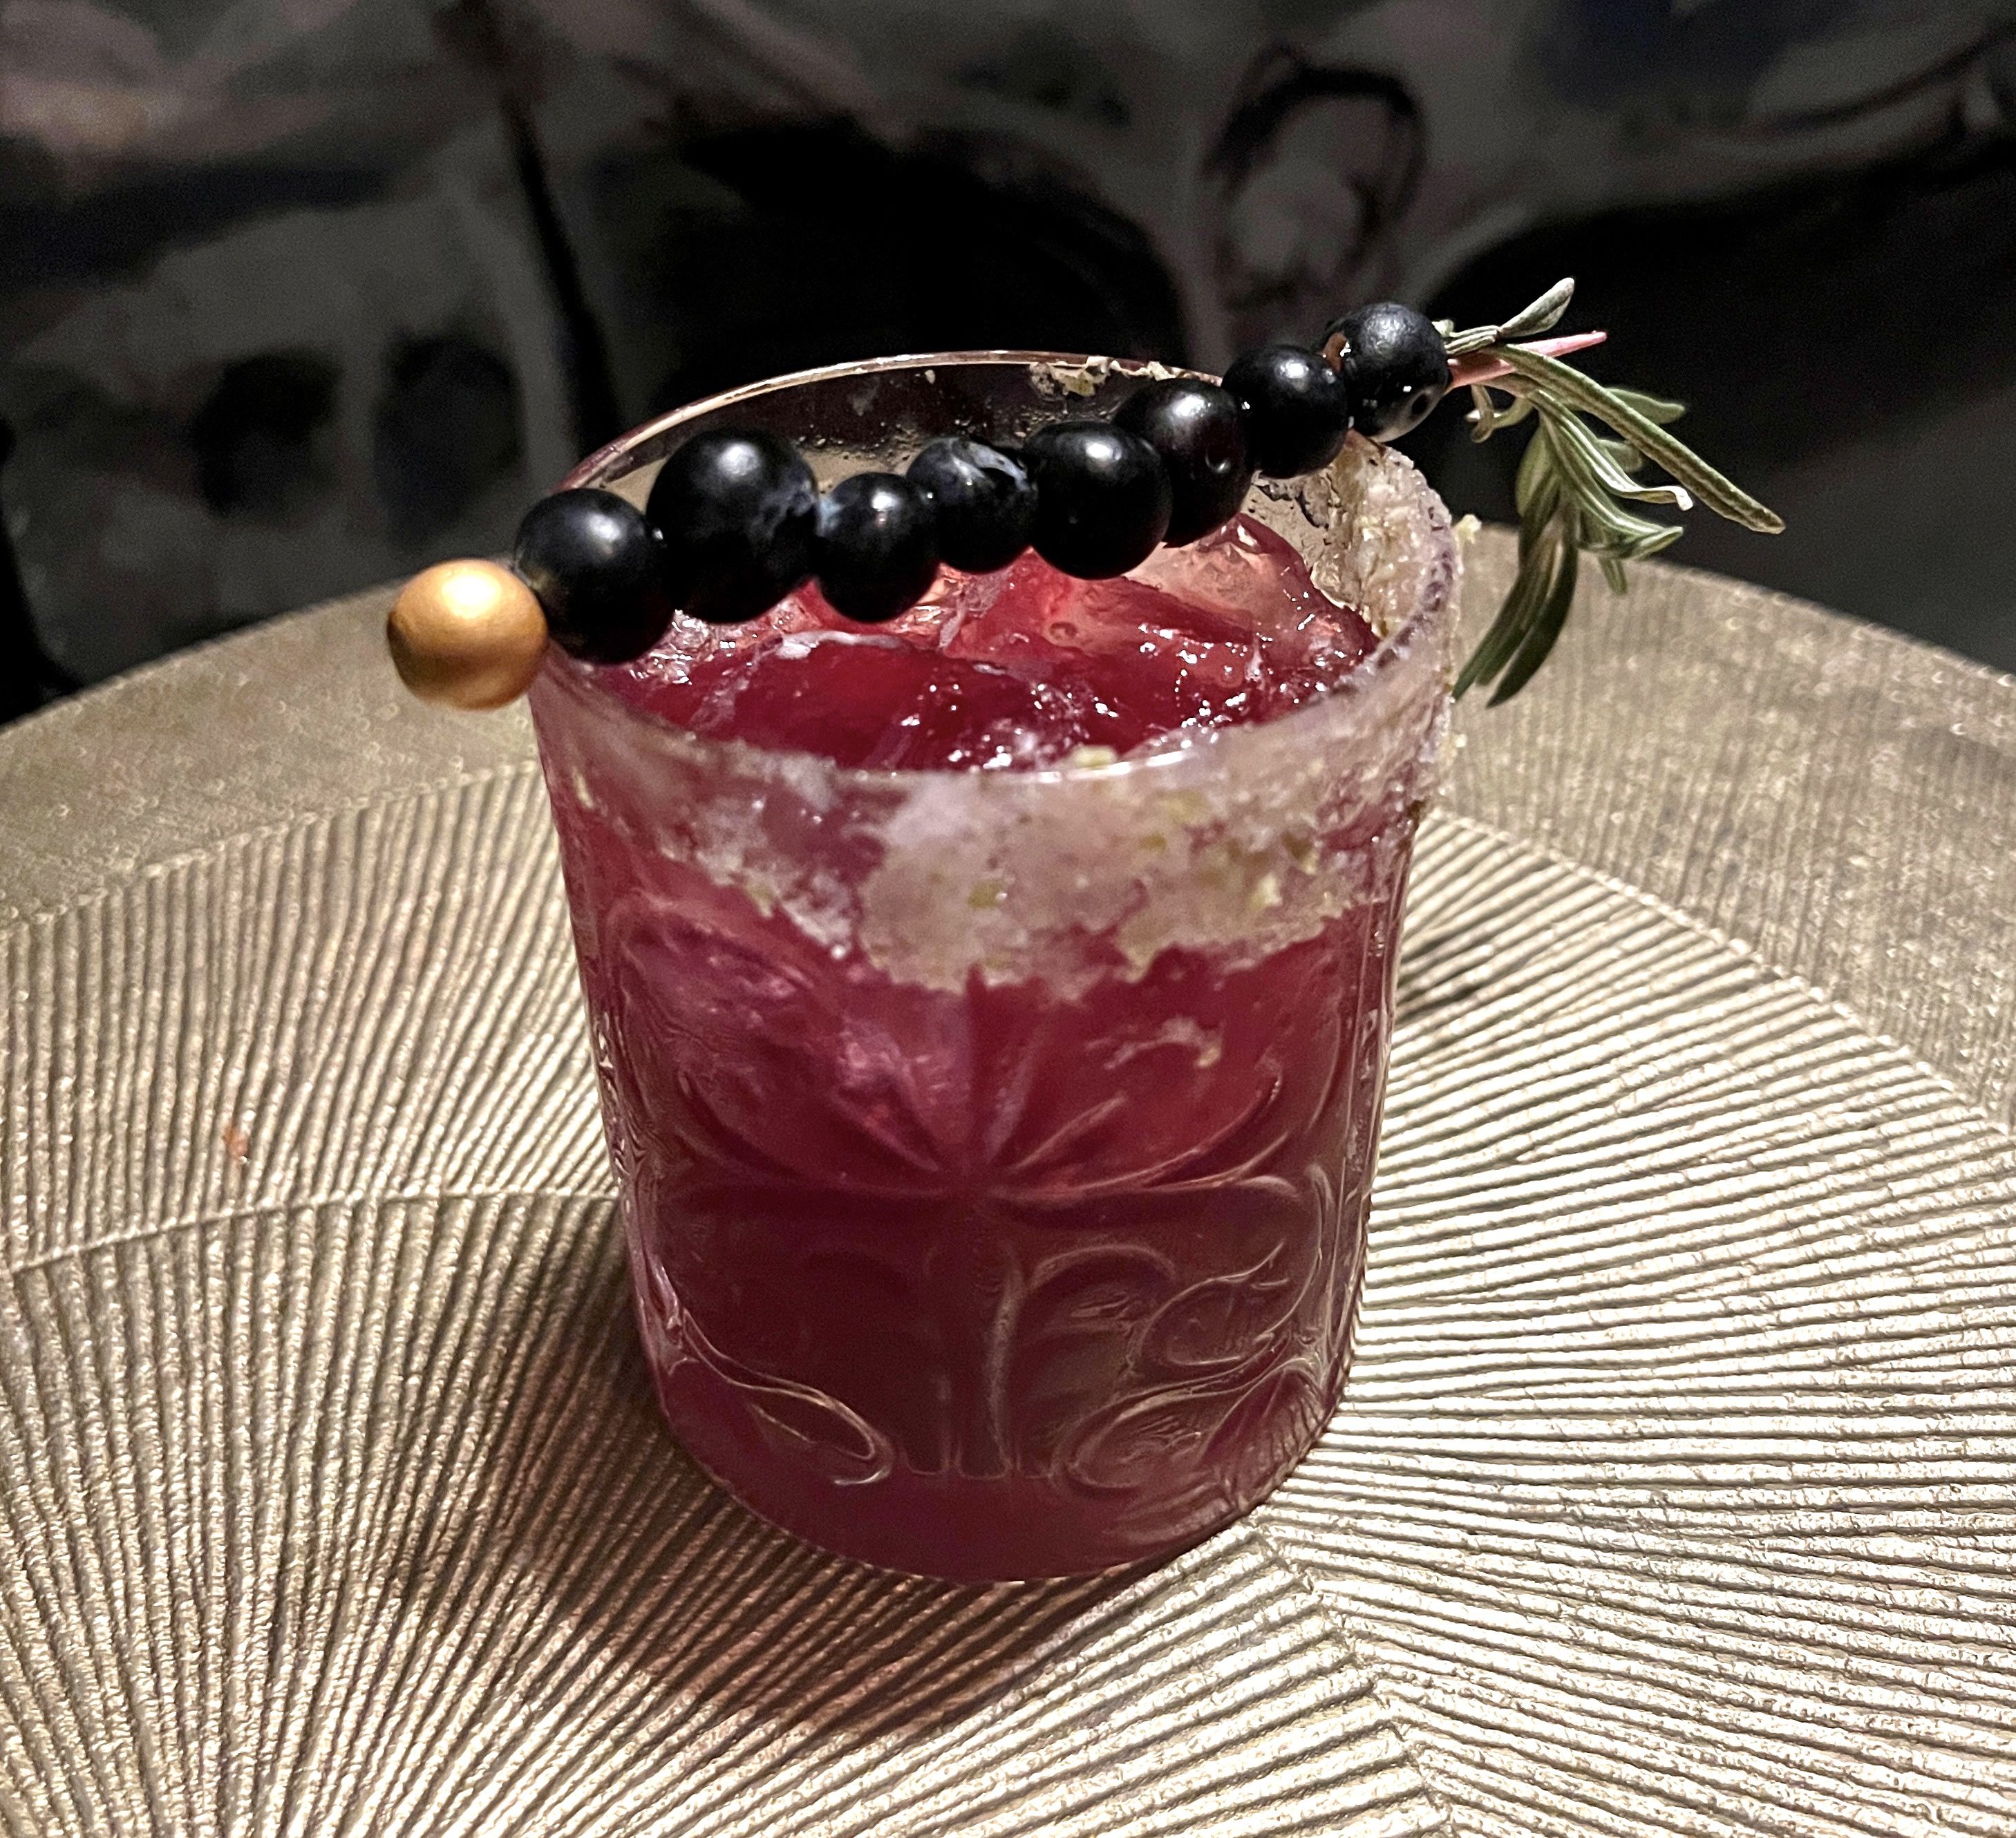 The Cocktails At Vanderpump À Paris Are Ridiculously Beautiful